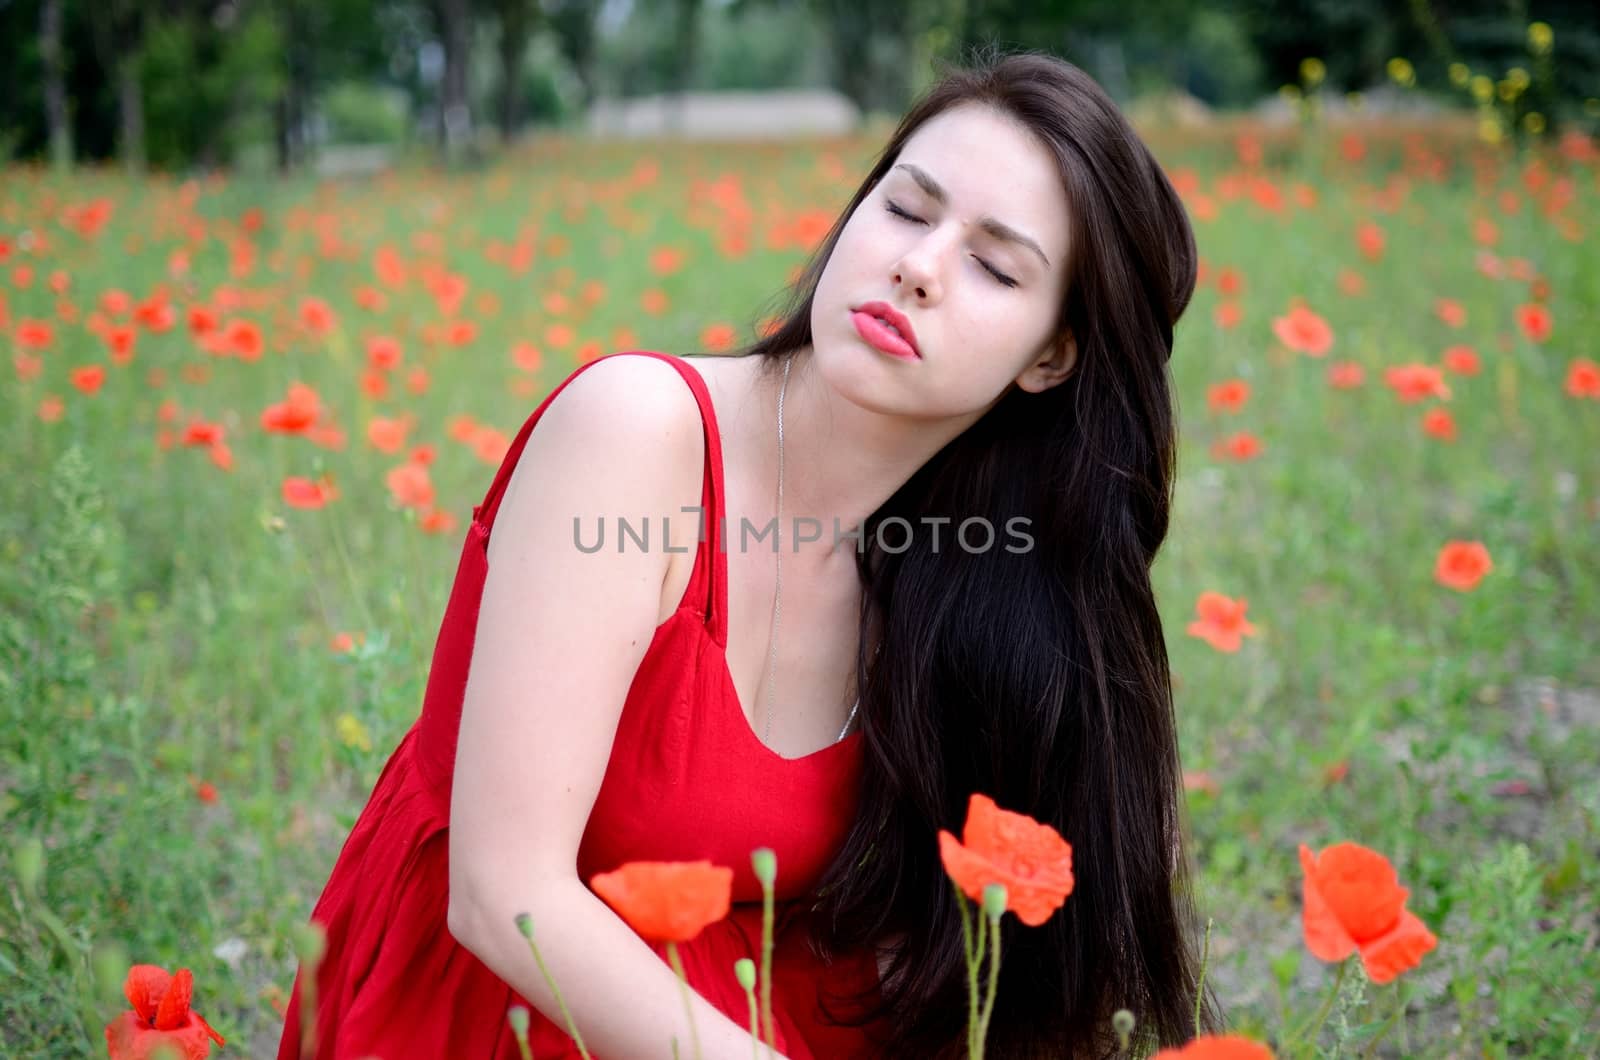 Charming girl surrounded by poppies. Female model with closed eyes, girl wearing red dress.